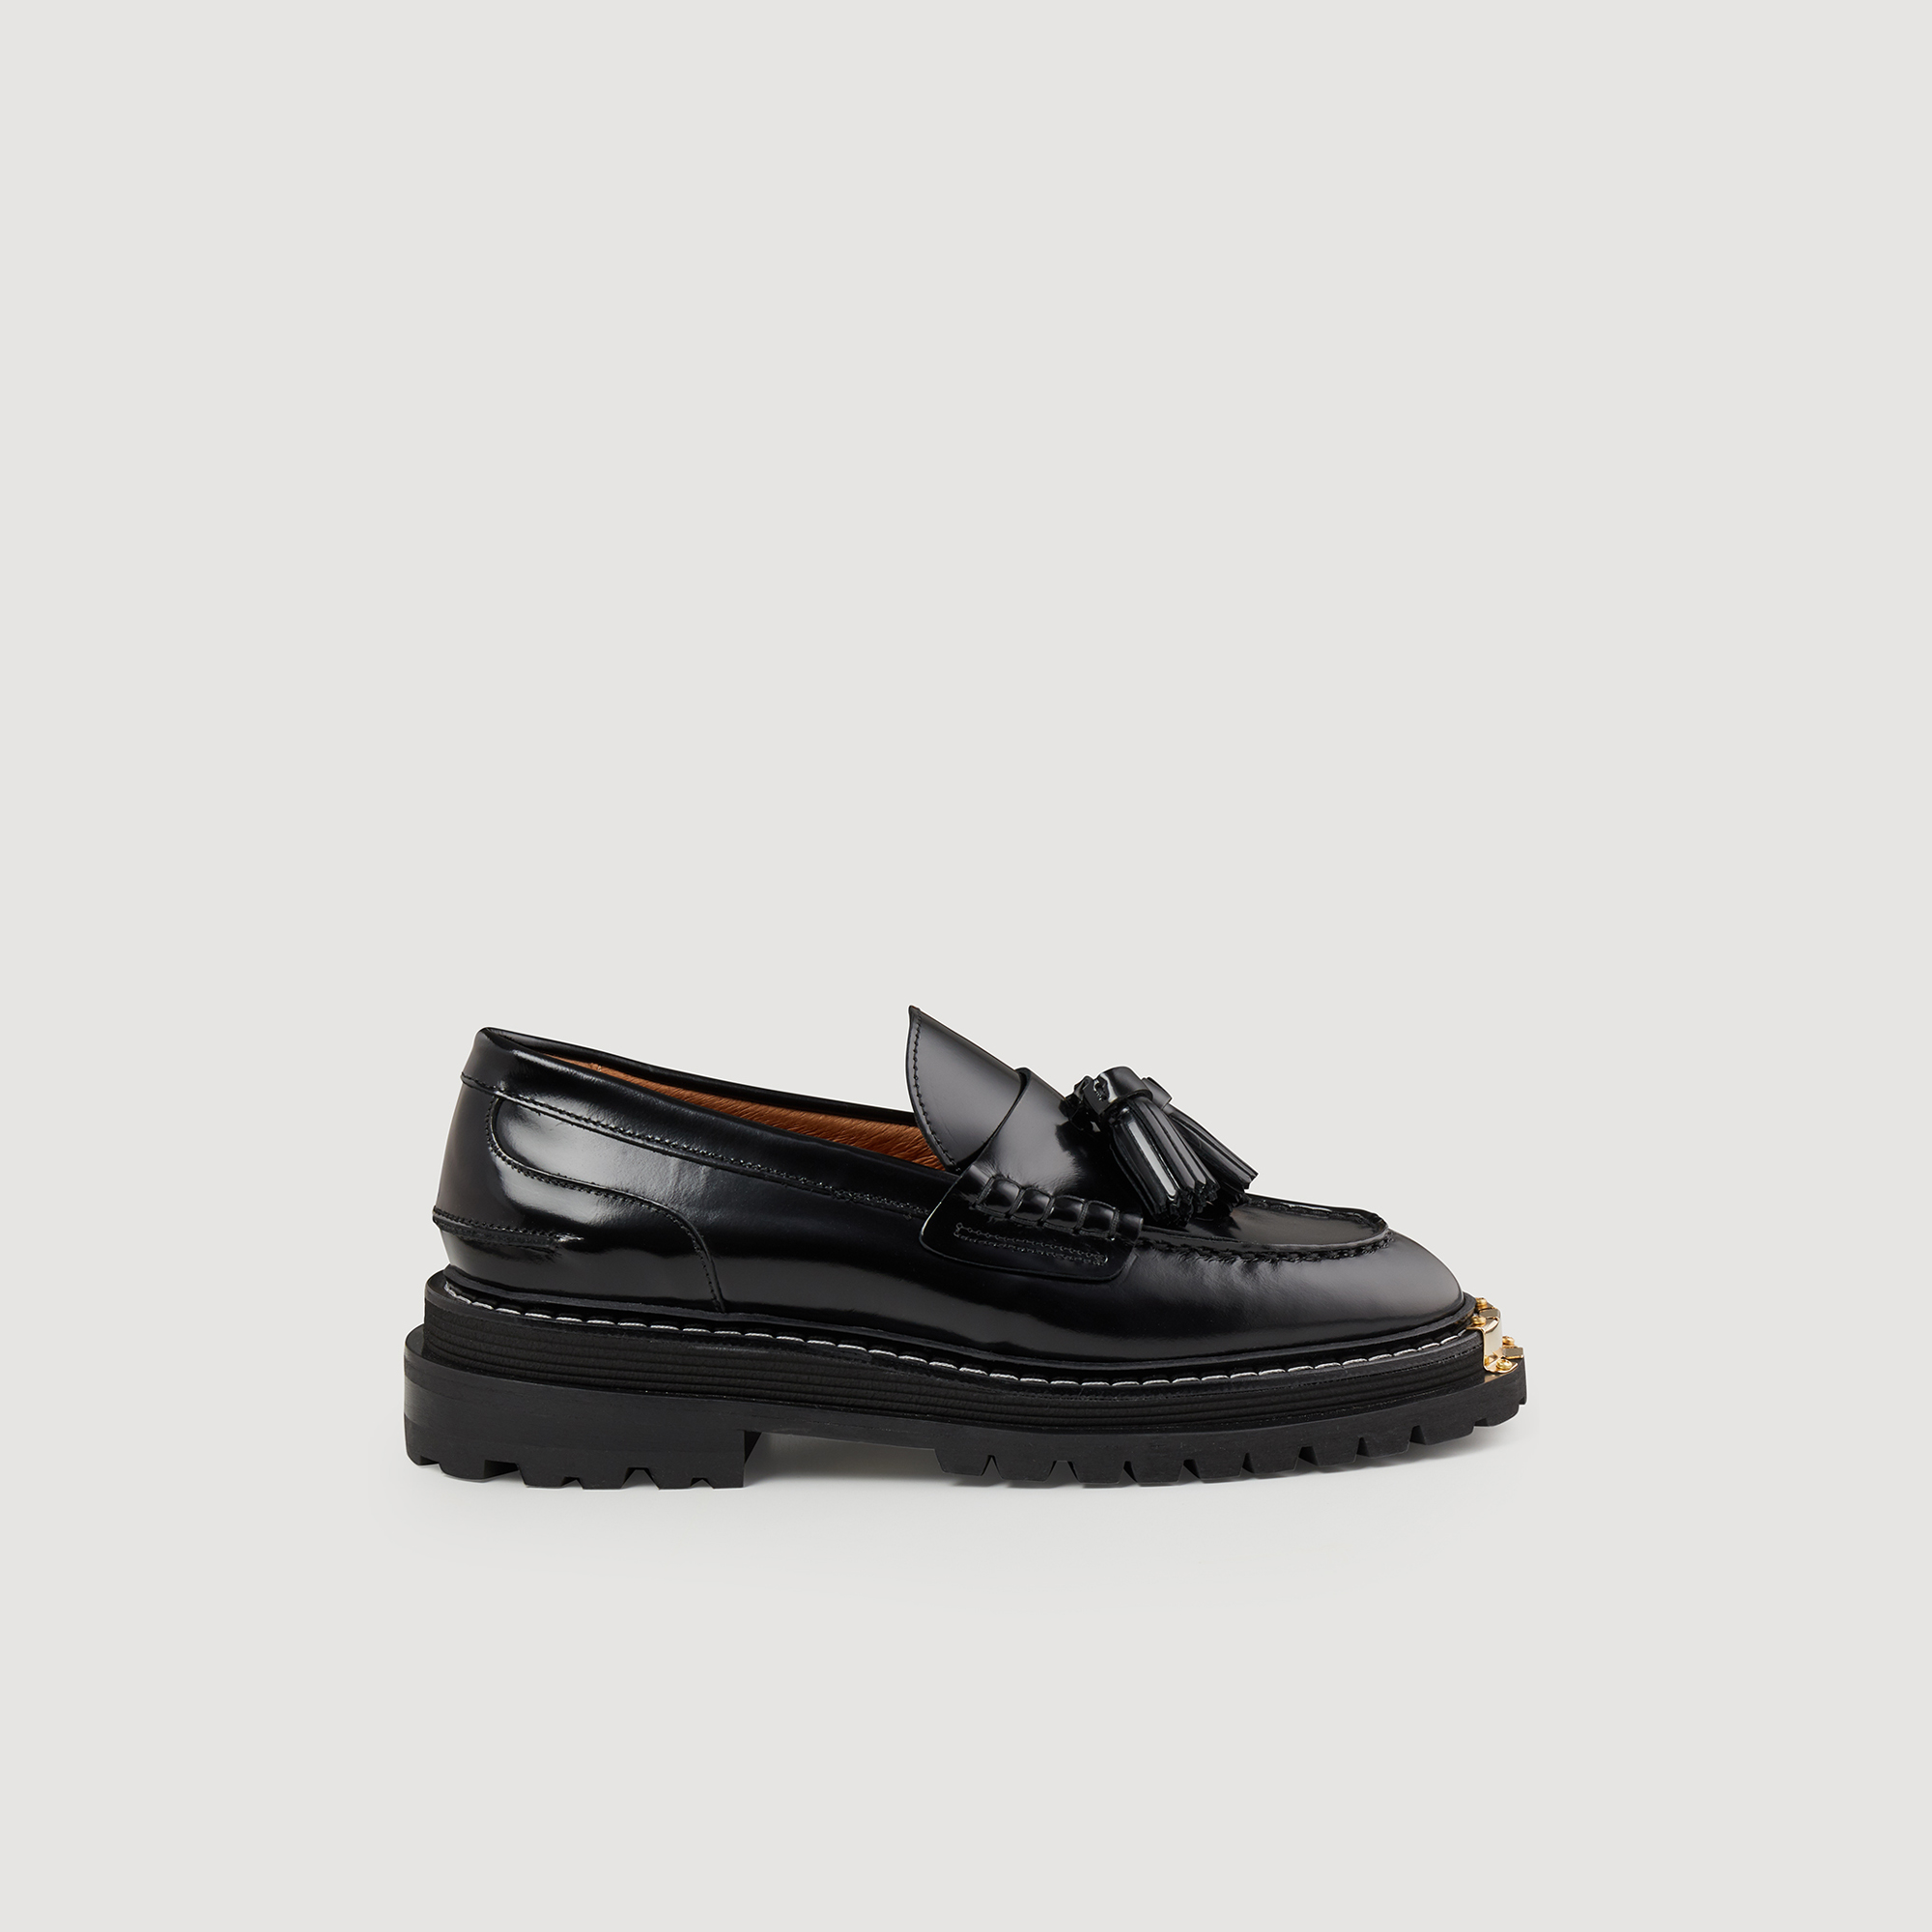 Sandro rubber Smooth leather loafers with a notched sole, a metal plate on the front and a tassel